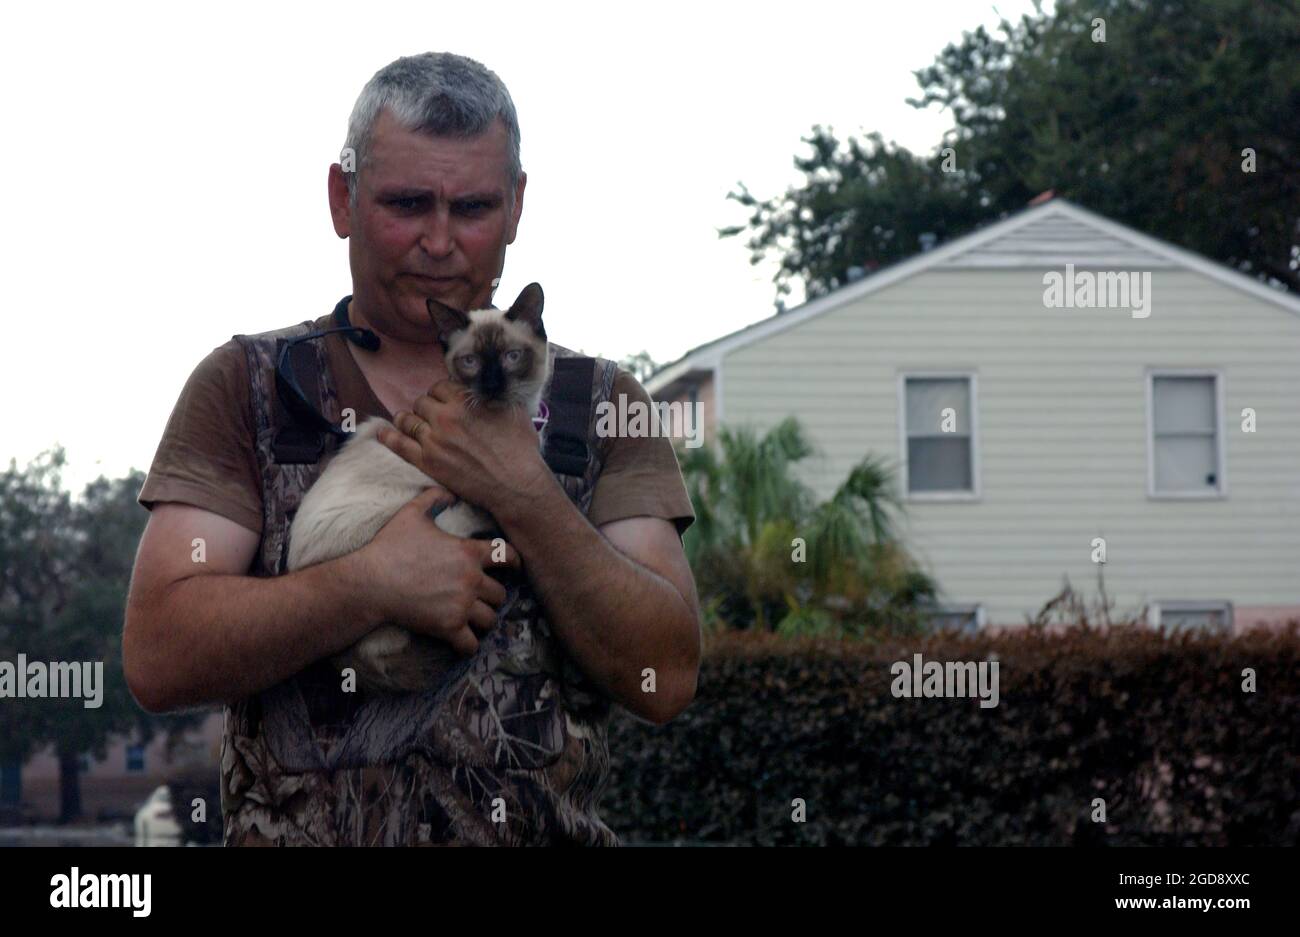 US Army (USA) Staff Sergeant (SSG) Charles Essler, 41st Brigade (BDE), Oregon Army National Guard (ORARNG), carries a Siamese cat he rescued from an apartment building in north New Orleans, Louisiana (LA), during a door-to-door external search as part of Joint Task Force (JTF) Hurricane Katrina. (USAF PHOTO BY TSGT ROGER M. DEY 050915-F-4970D-195) Stock Photo